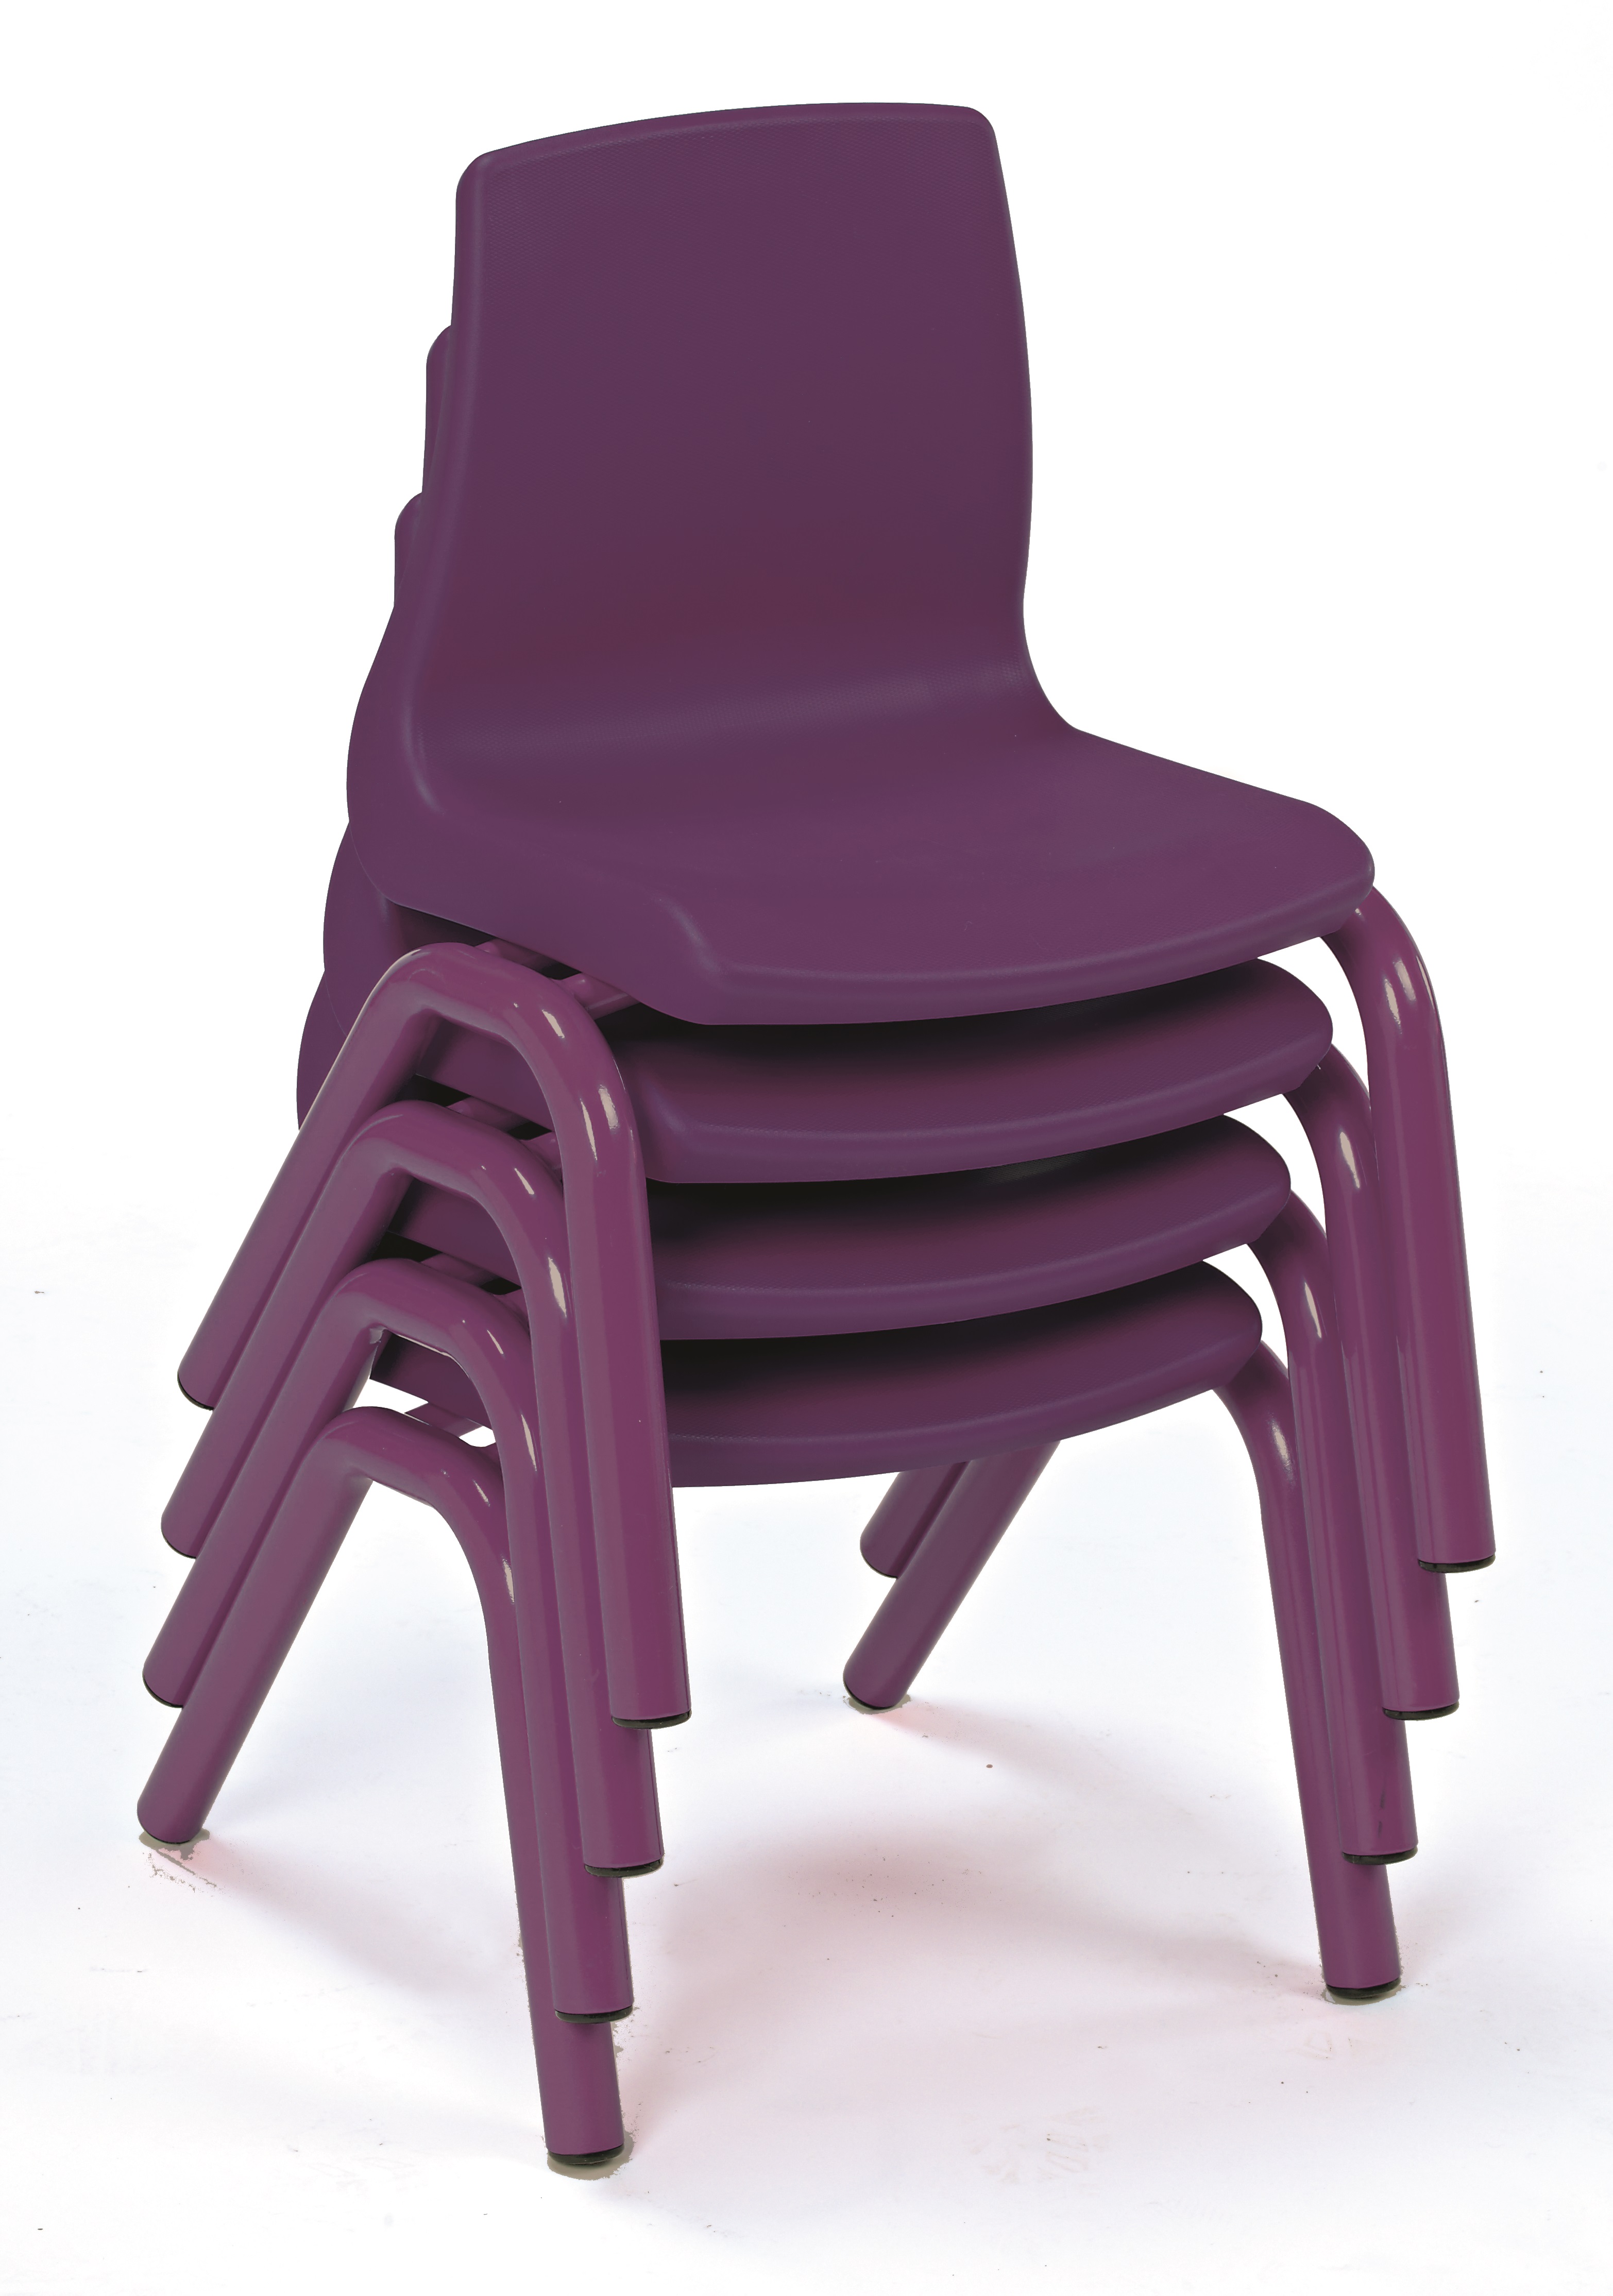 Harlequin Chairs Size A Purp